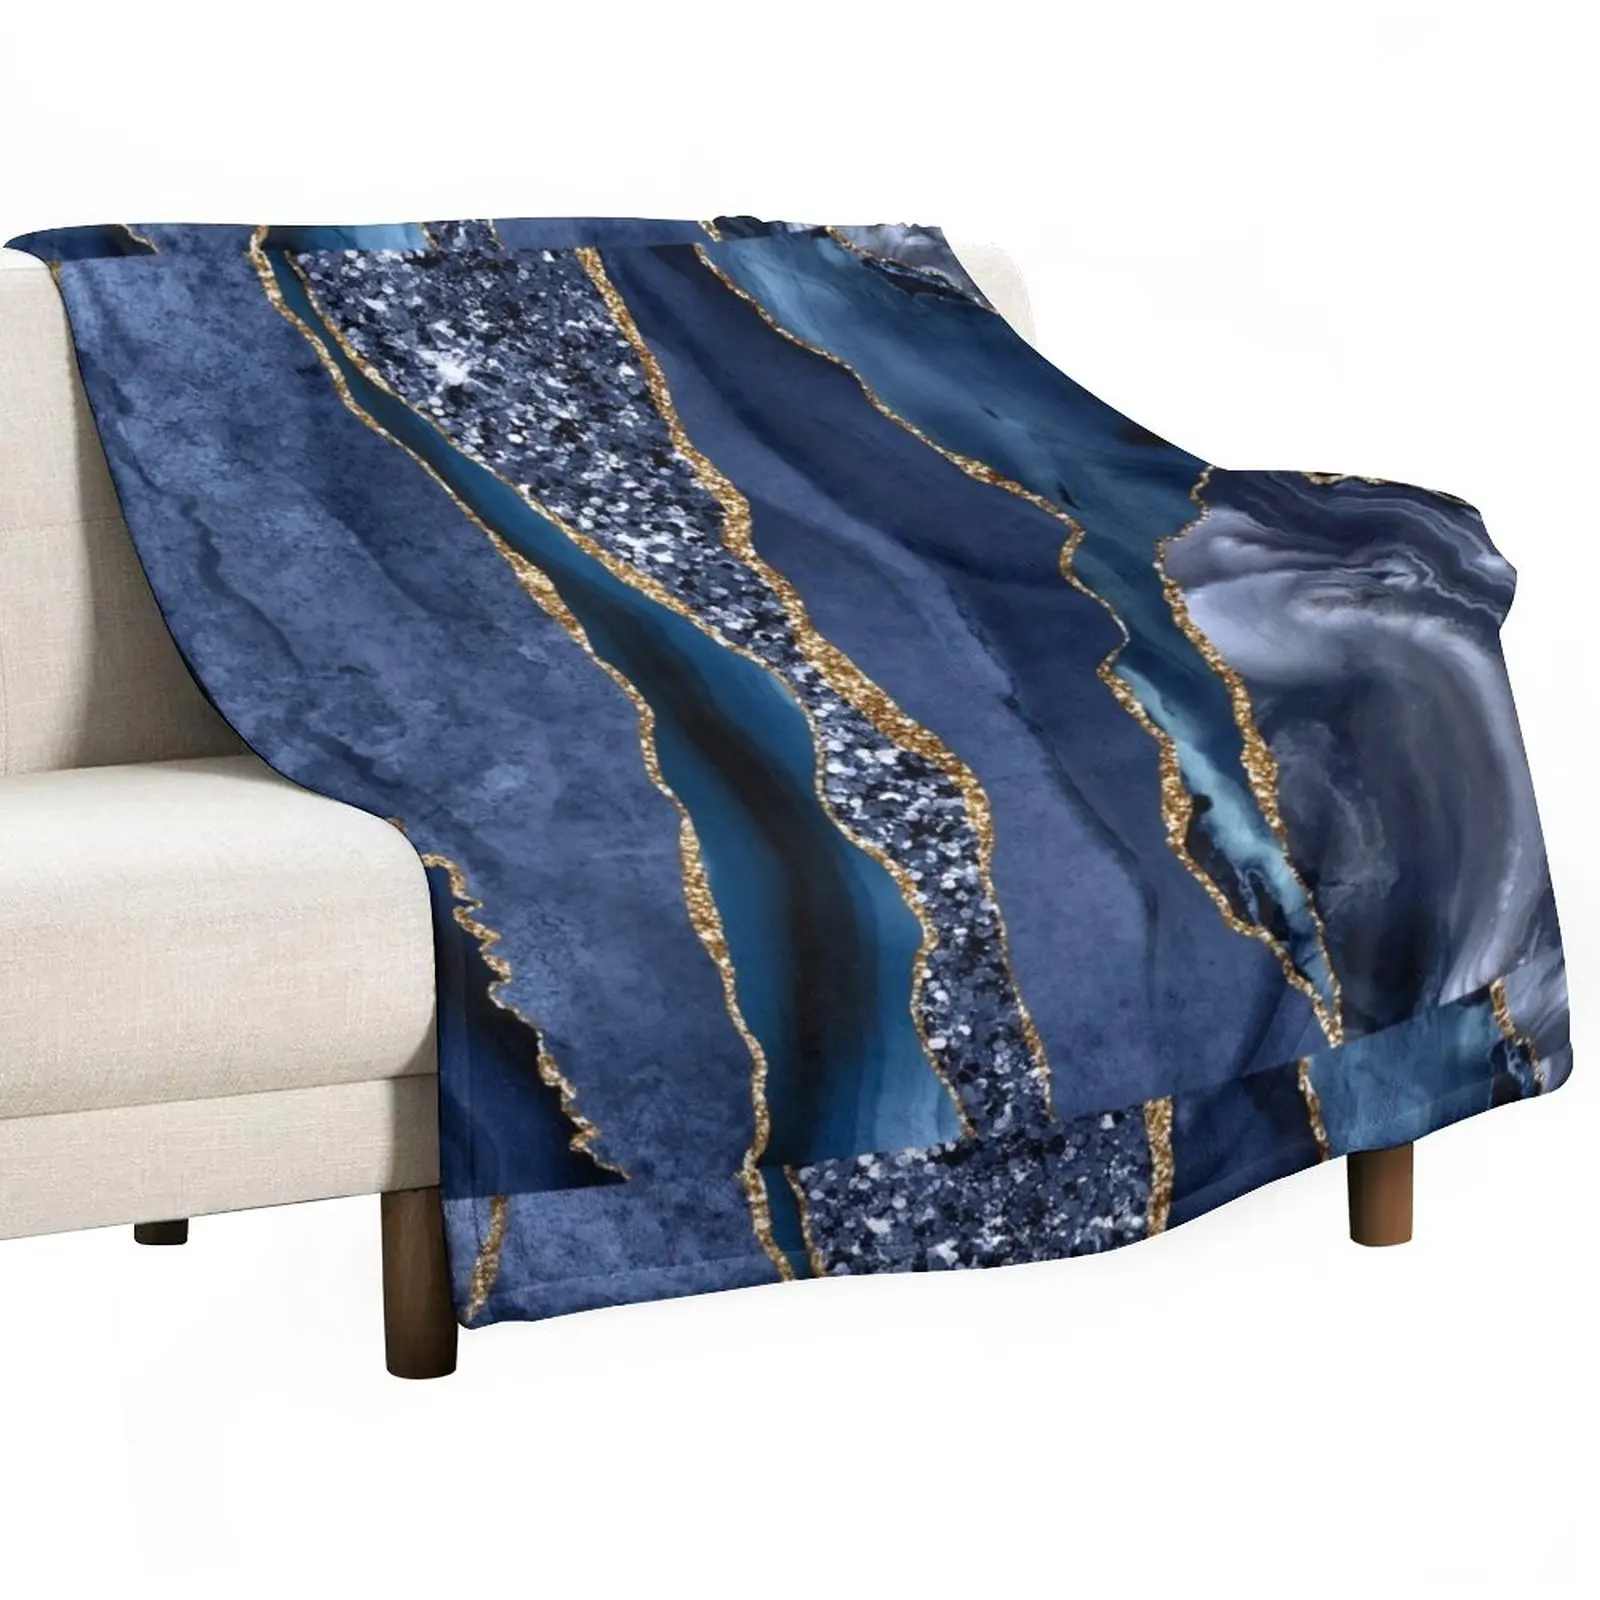 

Abstract Blue and Gold Glitter Modern Geode Agate Design Throw Blanket Beautiful Blankets Large Blanket